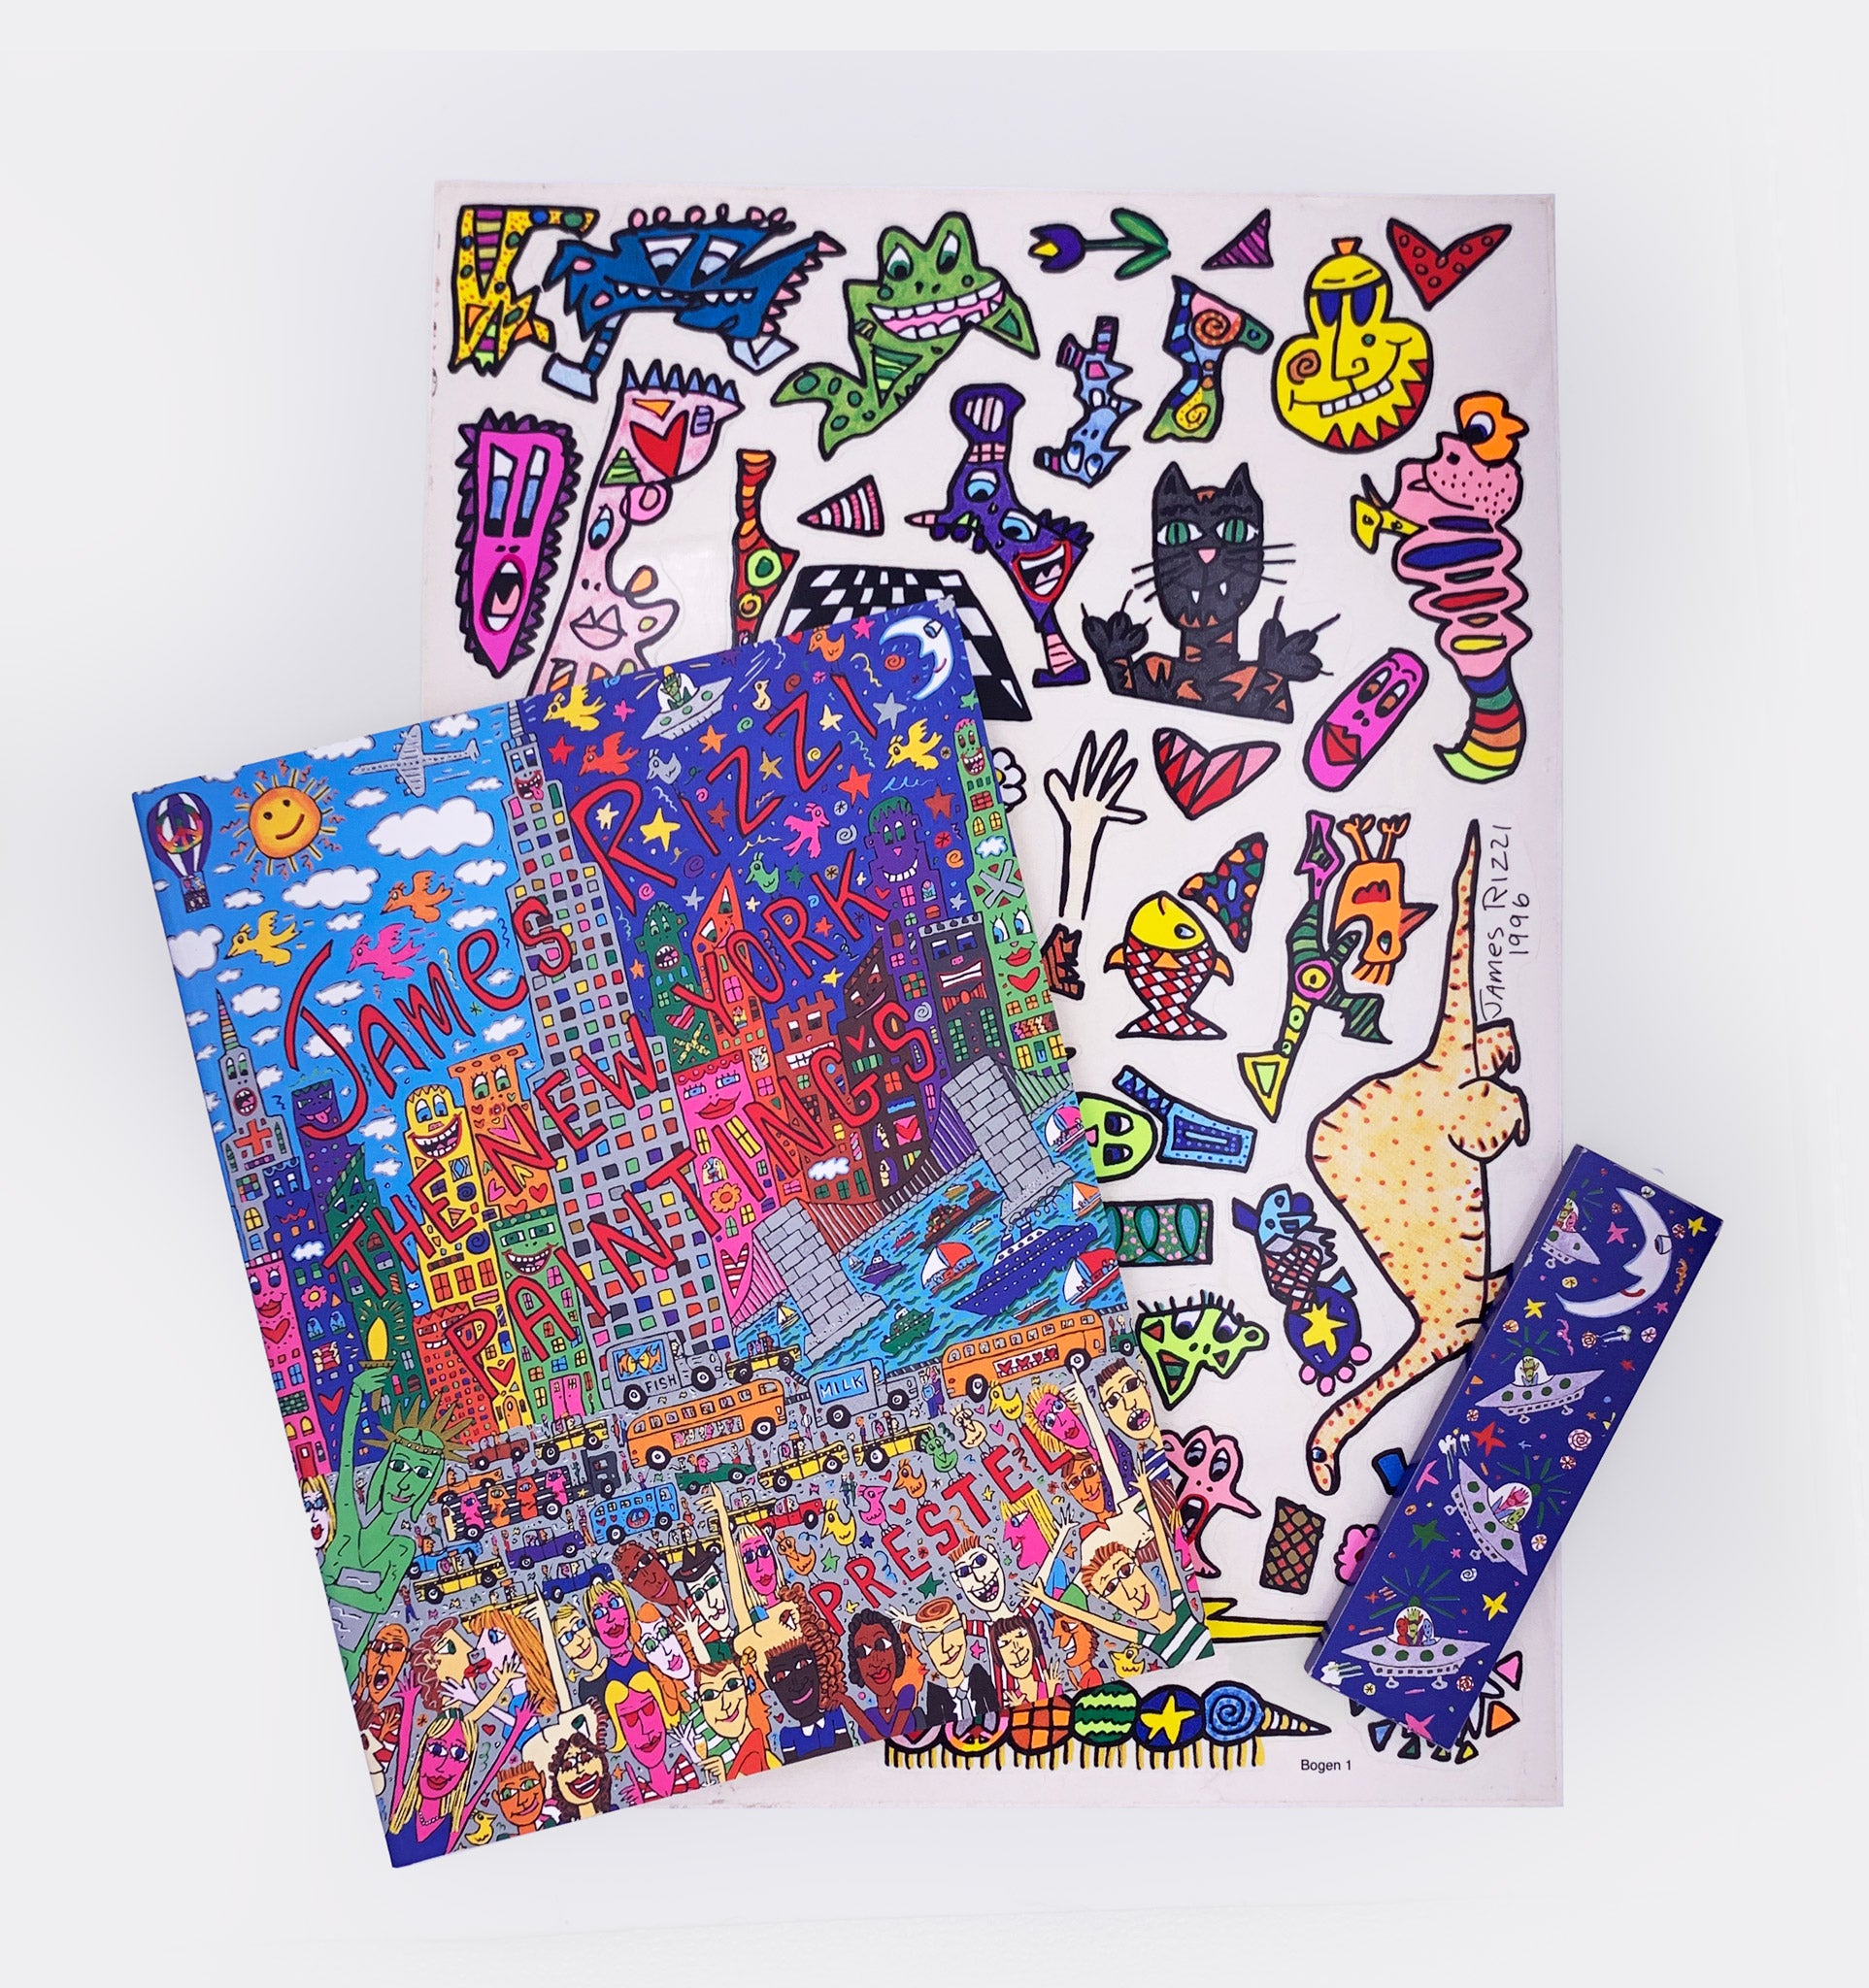 JAMES RIZZI | One-of-a-Kind | BE MAGICAL - Rizzi @ made by yourself - Artwork Set #1 | Flat-Print color lithography & The New York Paintings